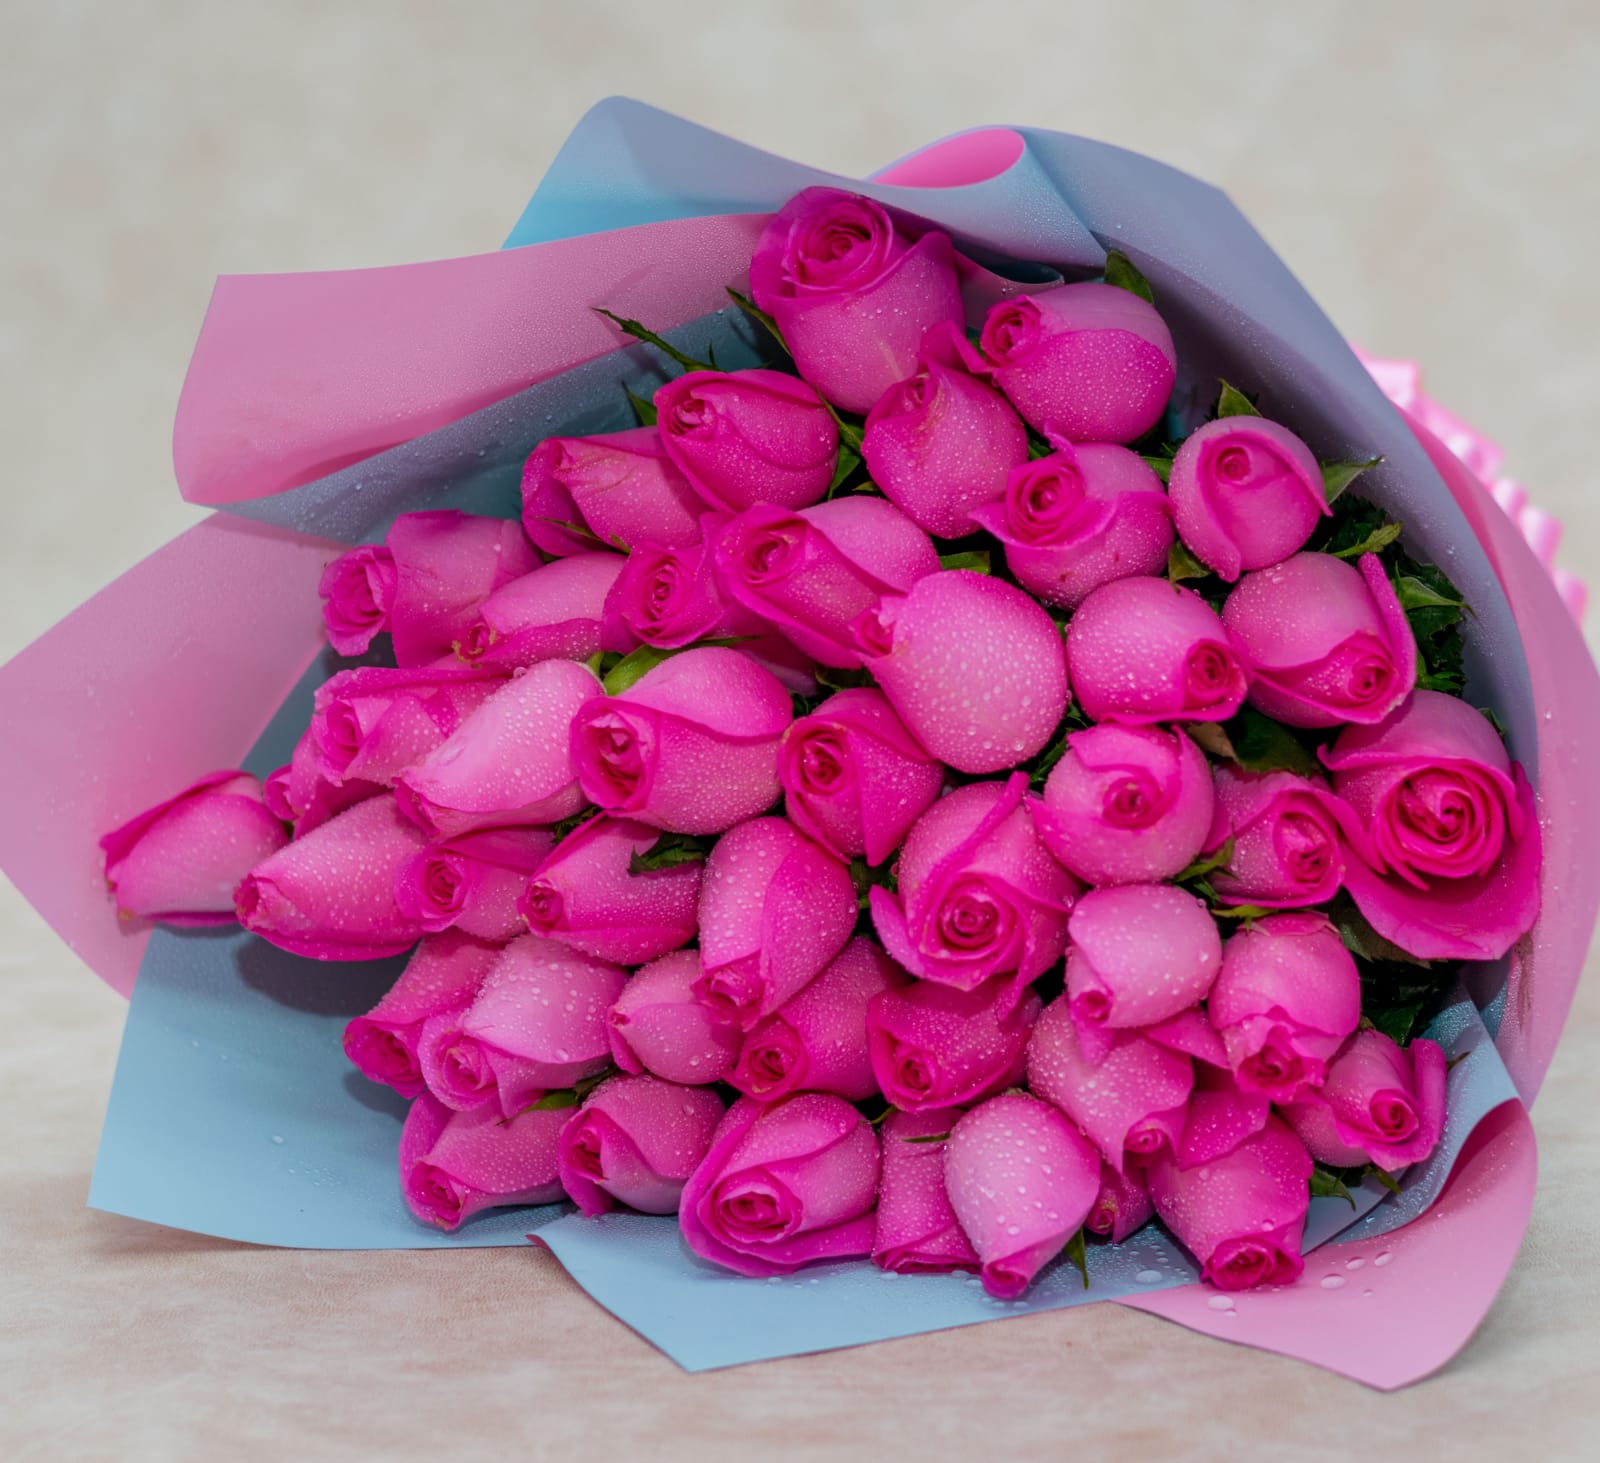 15 Lessons About flower gift You Need To Learn To Succeed